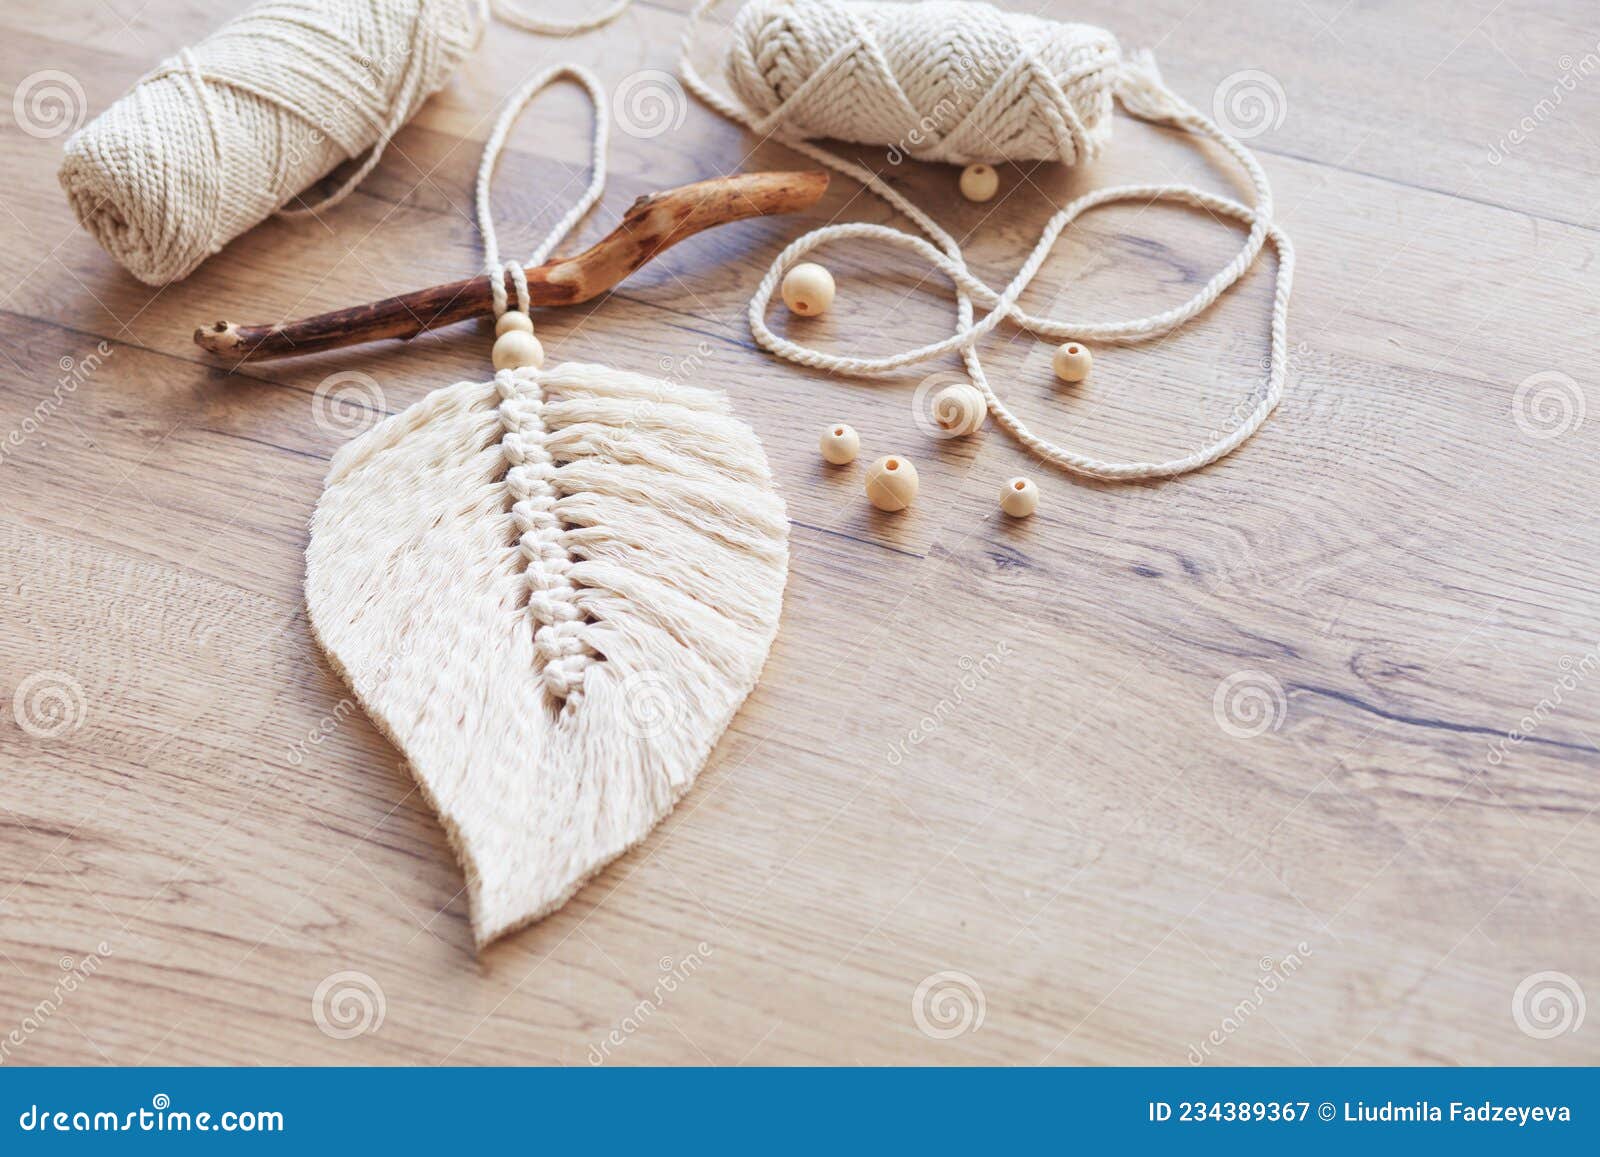 Macrame Leaf in Natural Color and Thread Windings Lying on a